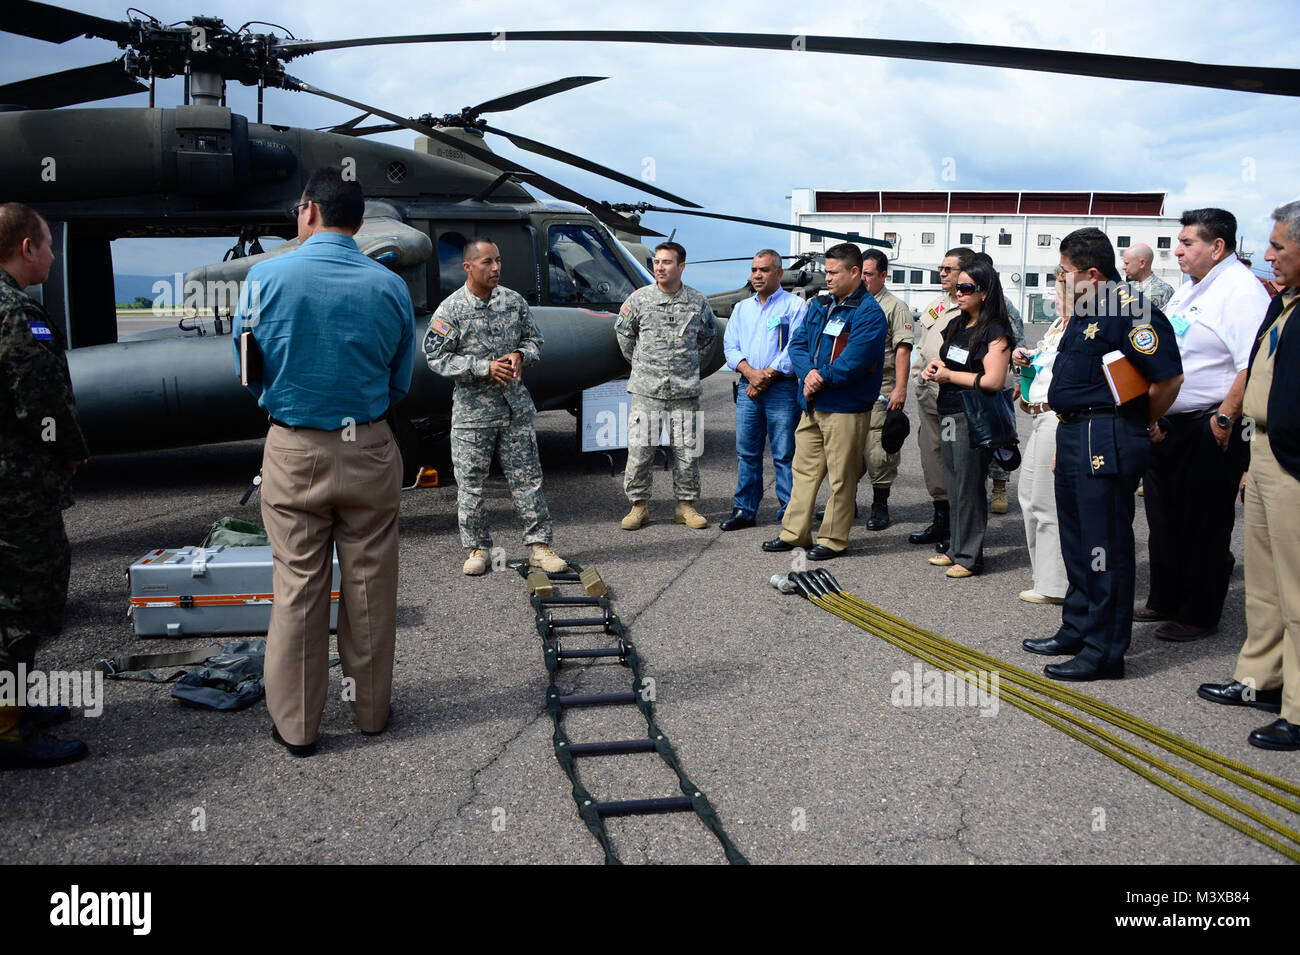 U.S. Army Sgt. Maynor Oliva, crew chief with the 1-228th Aviation Regiment, briefs Joint Task Force-Bravo’s Honduran Leaders’ Day guests on the capabilities of a UH-60L Black Hawk helicopter at Soto Cano Air Base, Honduras, Nov. 14, 2014. Over 40 leaders from around the Republic of Honduras came to learn more about the mission and capabilities of JTF-Bravo and Soto Cano Air Base. (U.S. Air Force photo/Tech. Sgt. Heather Redman) 141114-F-ZT243-178 by ussouthcom Stock Photo